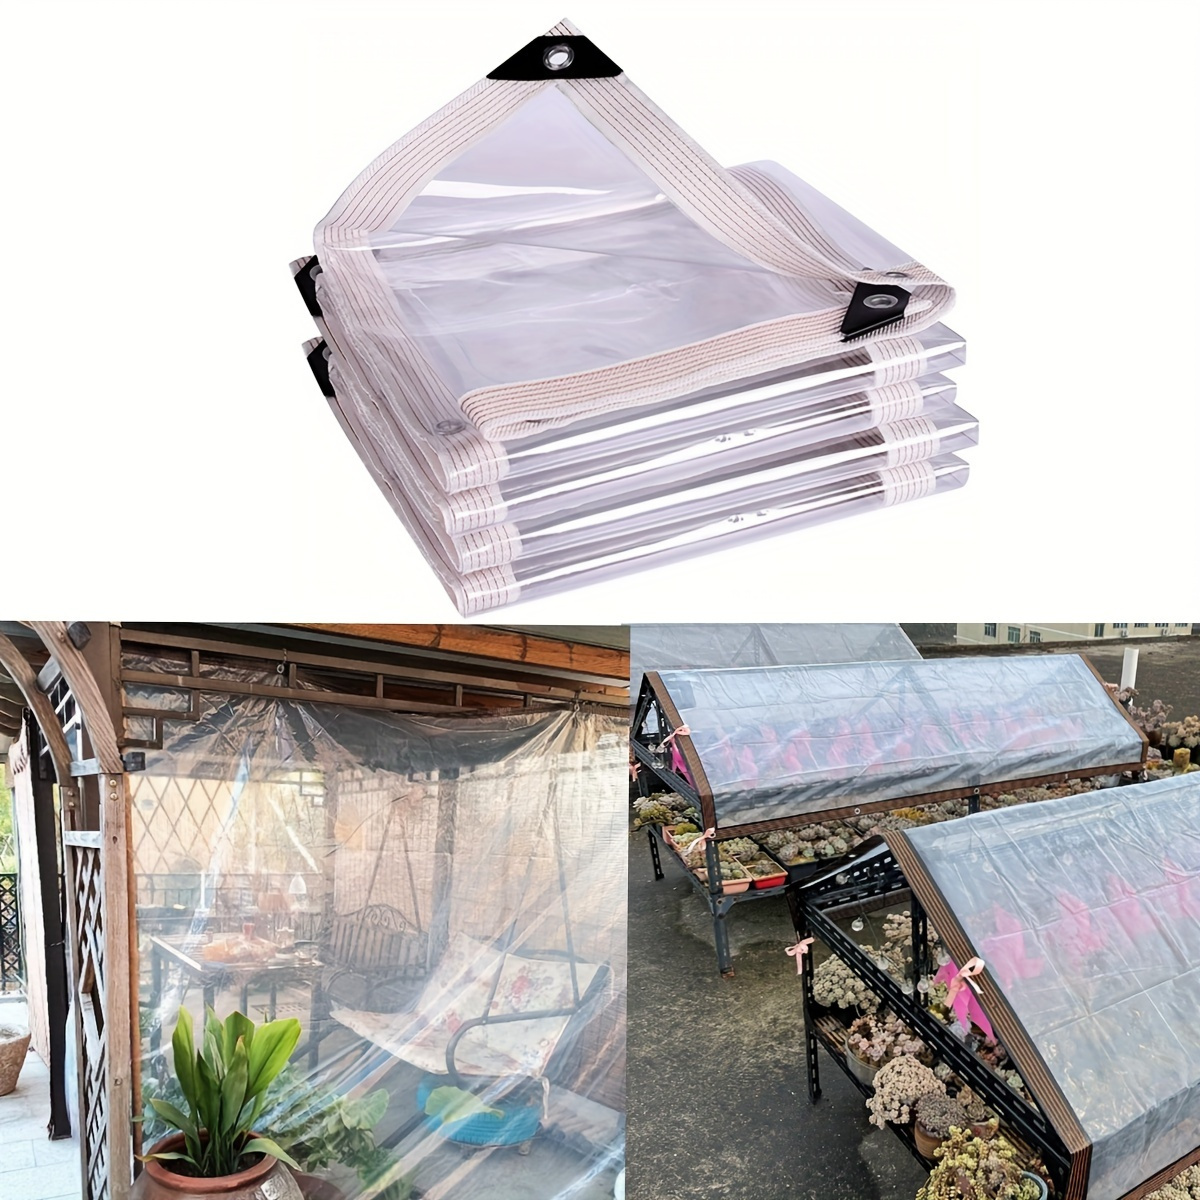 

1pc Clear Waterproof Tarp With Grommets, Transparent Garden Rainproof Covering Tarpaulin, For Patio Enclosure Camping Outdoor Tent Cover Porch Canopy